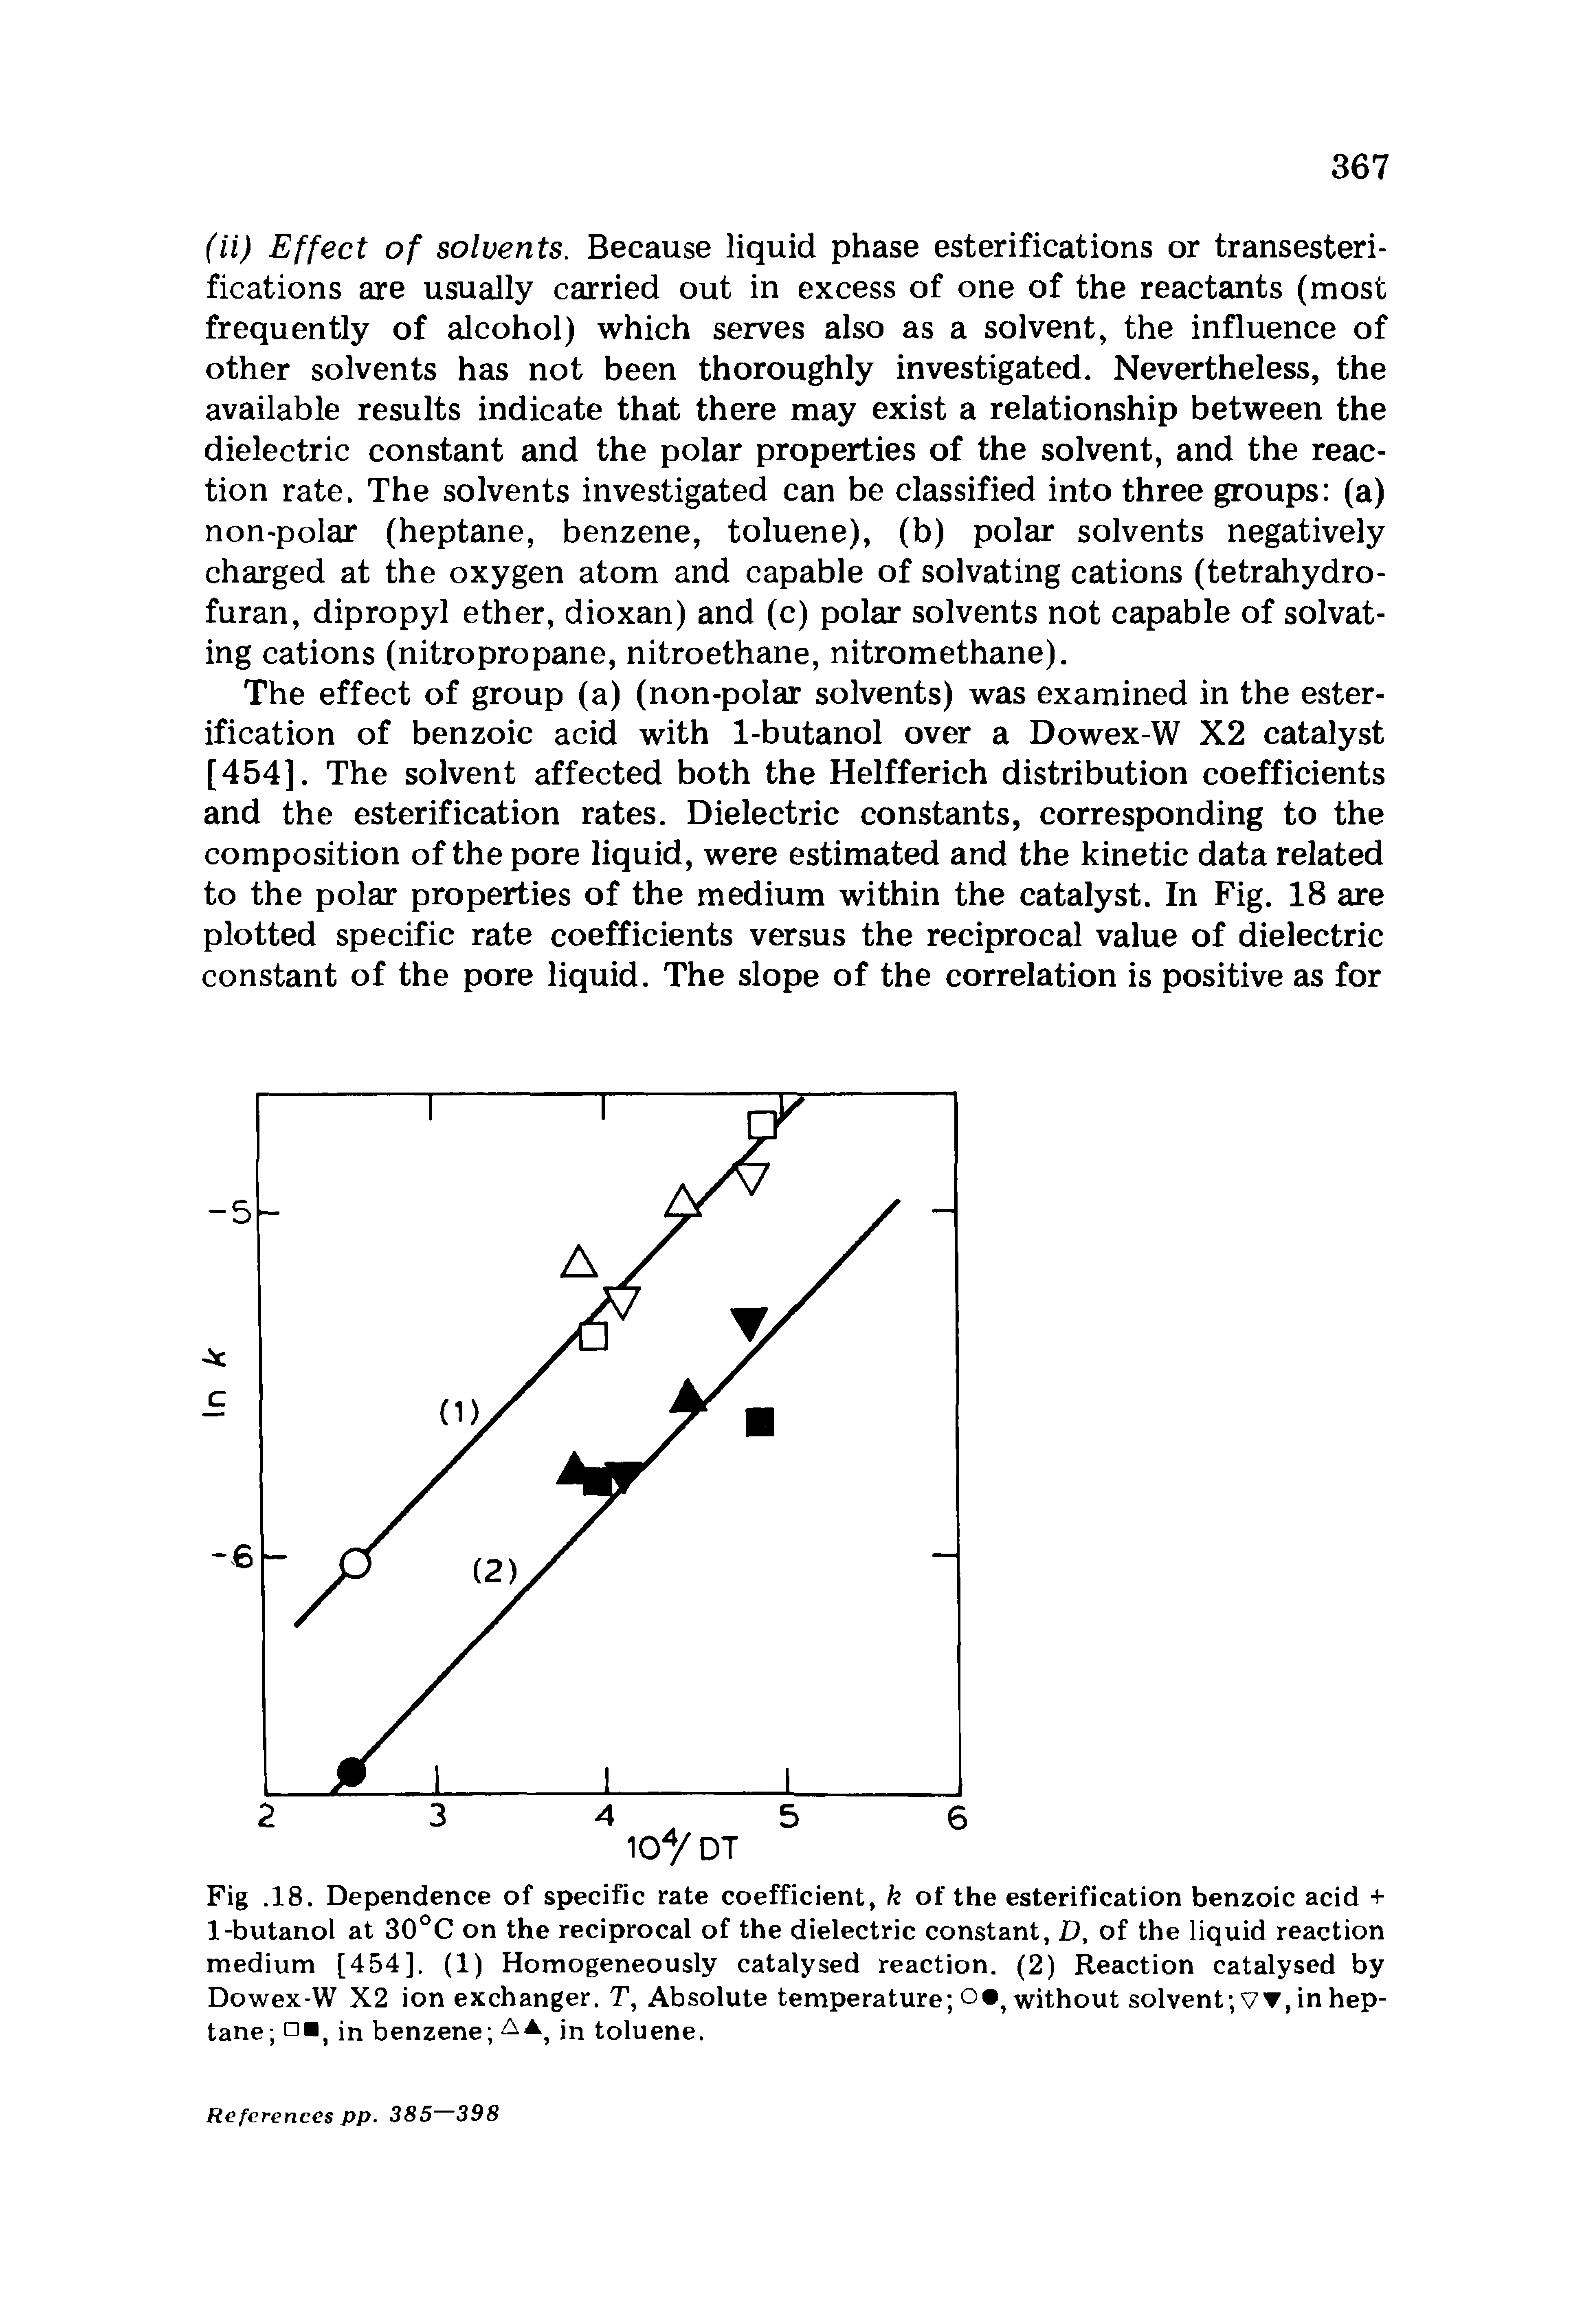 Fig. 18. Dependence of specific rate coefficient, k of the esterification benzoic acid + 1-butanol at 30°C on the reciprocal of the dielectric constant, D, of the liquid reaction medium [454], (1) Homogeneously catalysed reaction. (2) Reaction catalysed by Dowex-W X2 ion exchanger. T, Absolute temperature omy without solvent VV, in heptane in benzene in toluene.